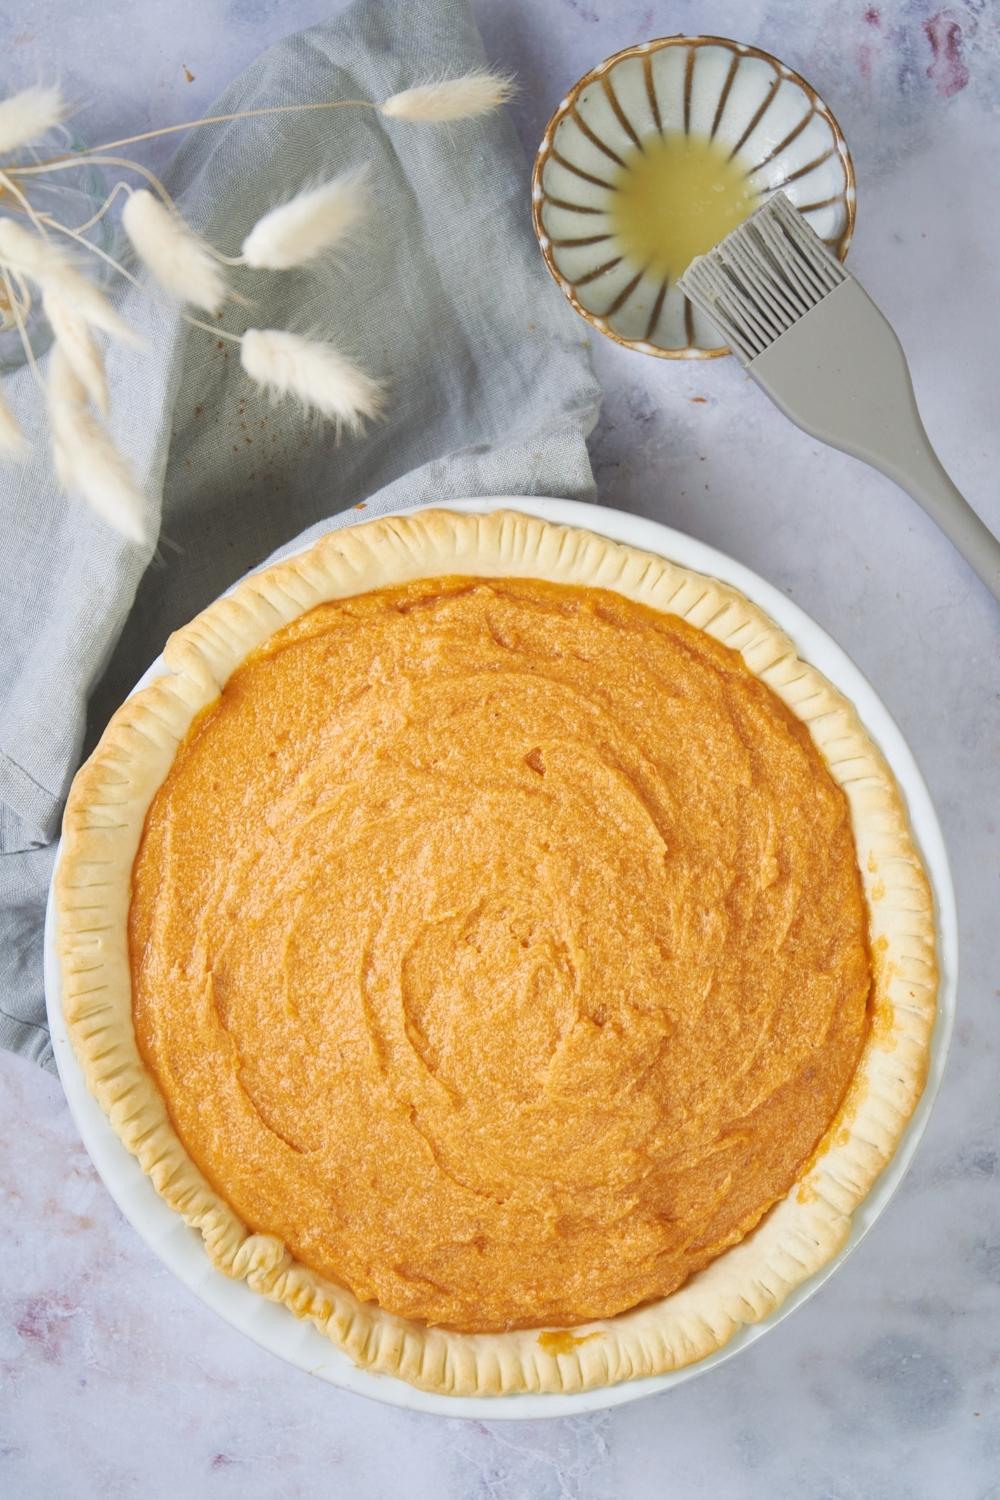 Patti Labelle's sweet potato pie unbaked next to a small bowl of melted butter.